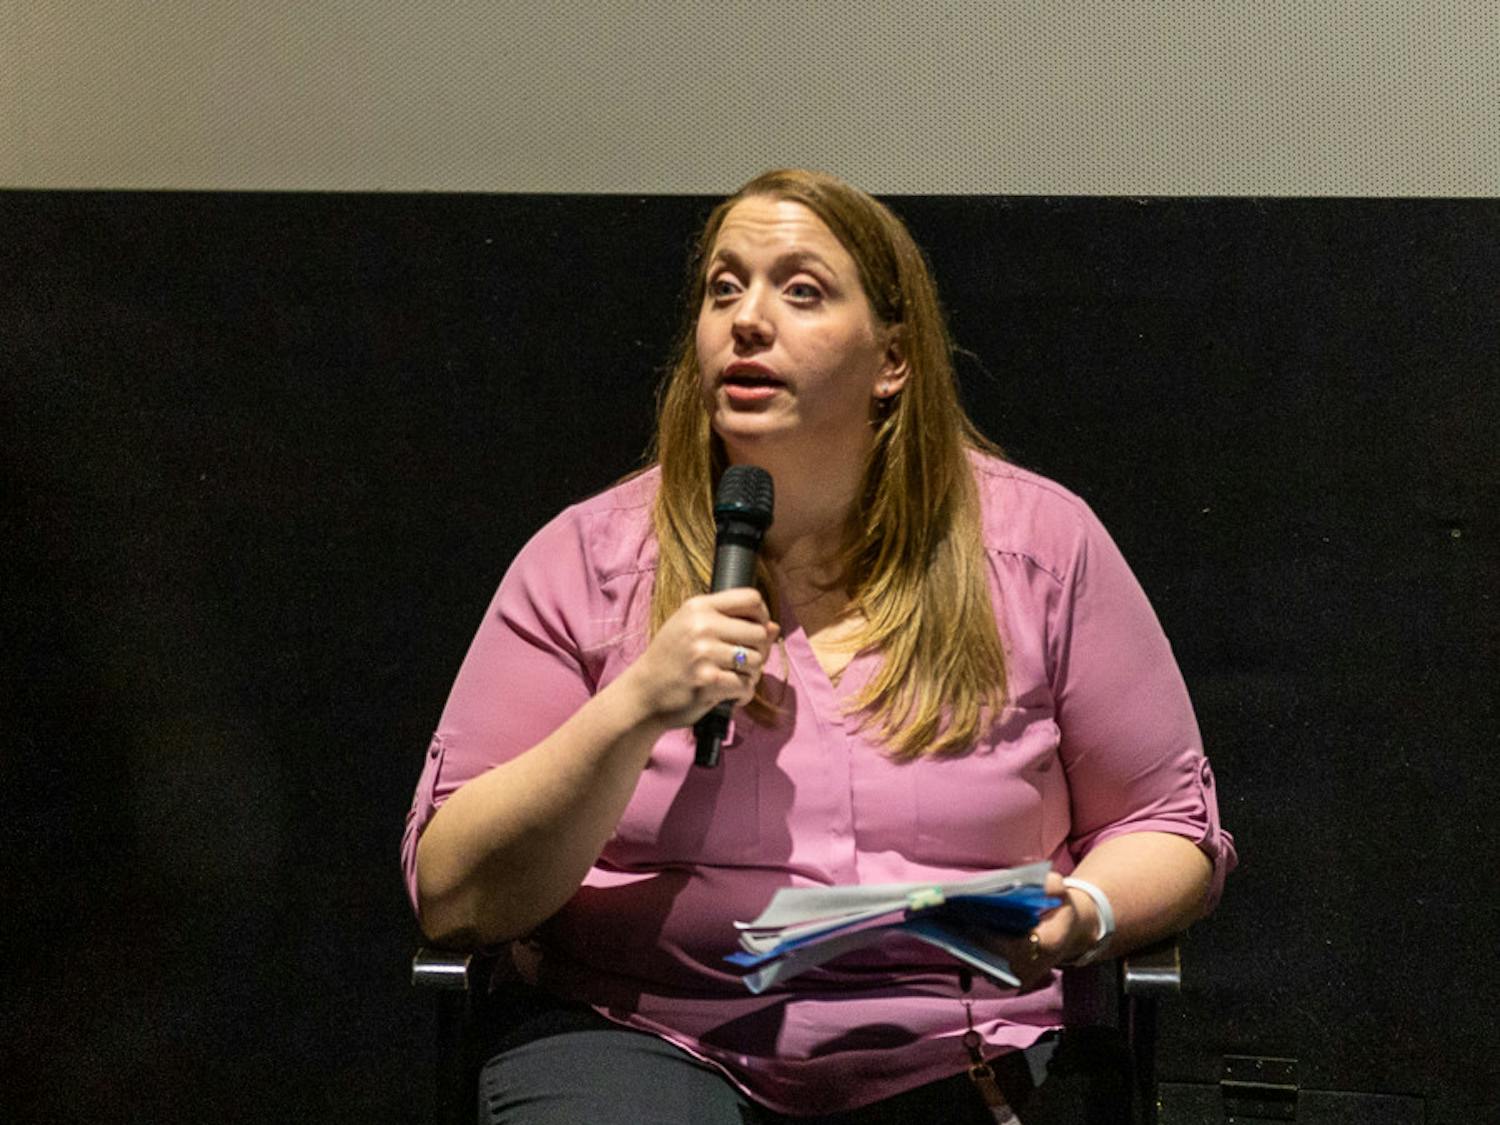 Assistant Professor at USC's Arnold School of Public Health, Dr. Jennifer Fillo introduces the panel of medical experts after the showing of "Love in the Time of Fentanyl" on Jan. 25, 2023. The panel went into more detail about the film and the ever-worsening fentanyl epidemic, and the resources offered in South Carolina that are available for people who are struggling with addiction.